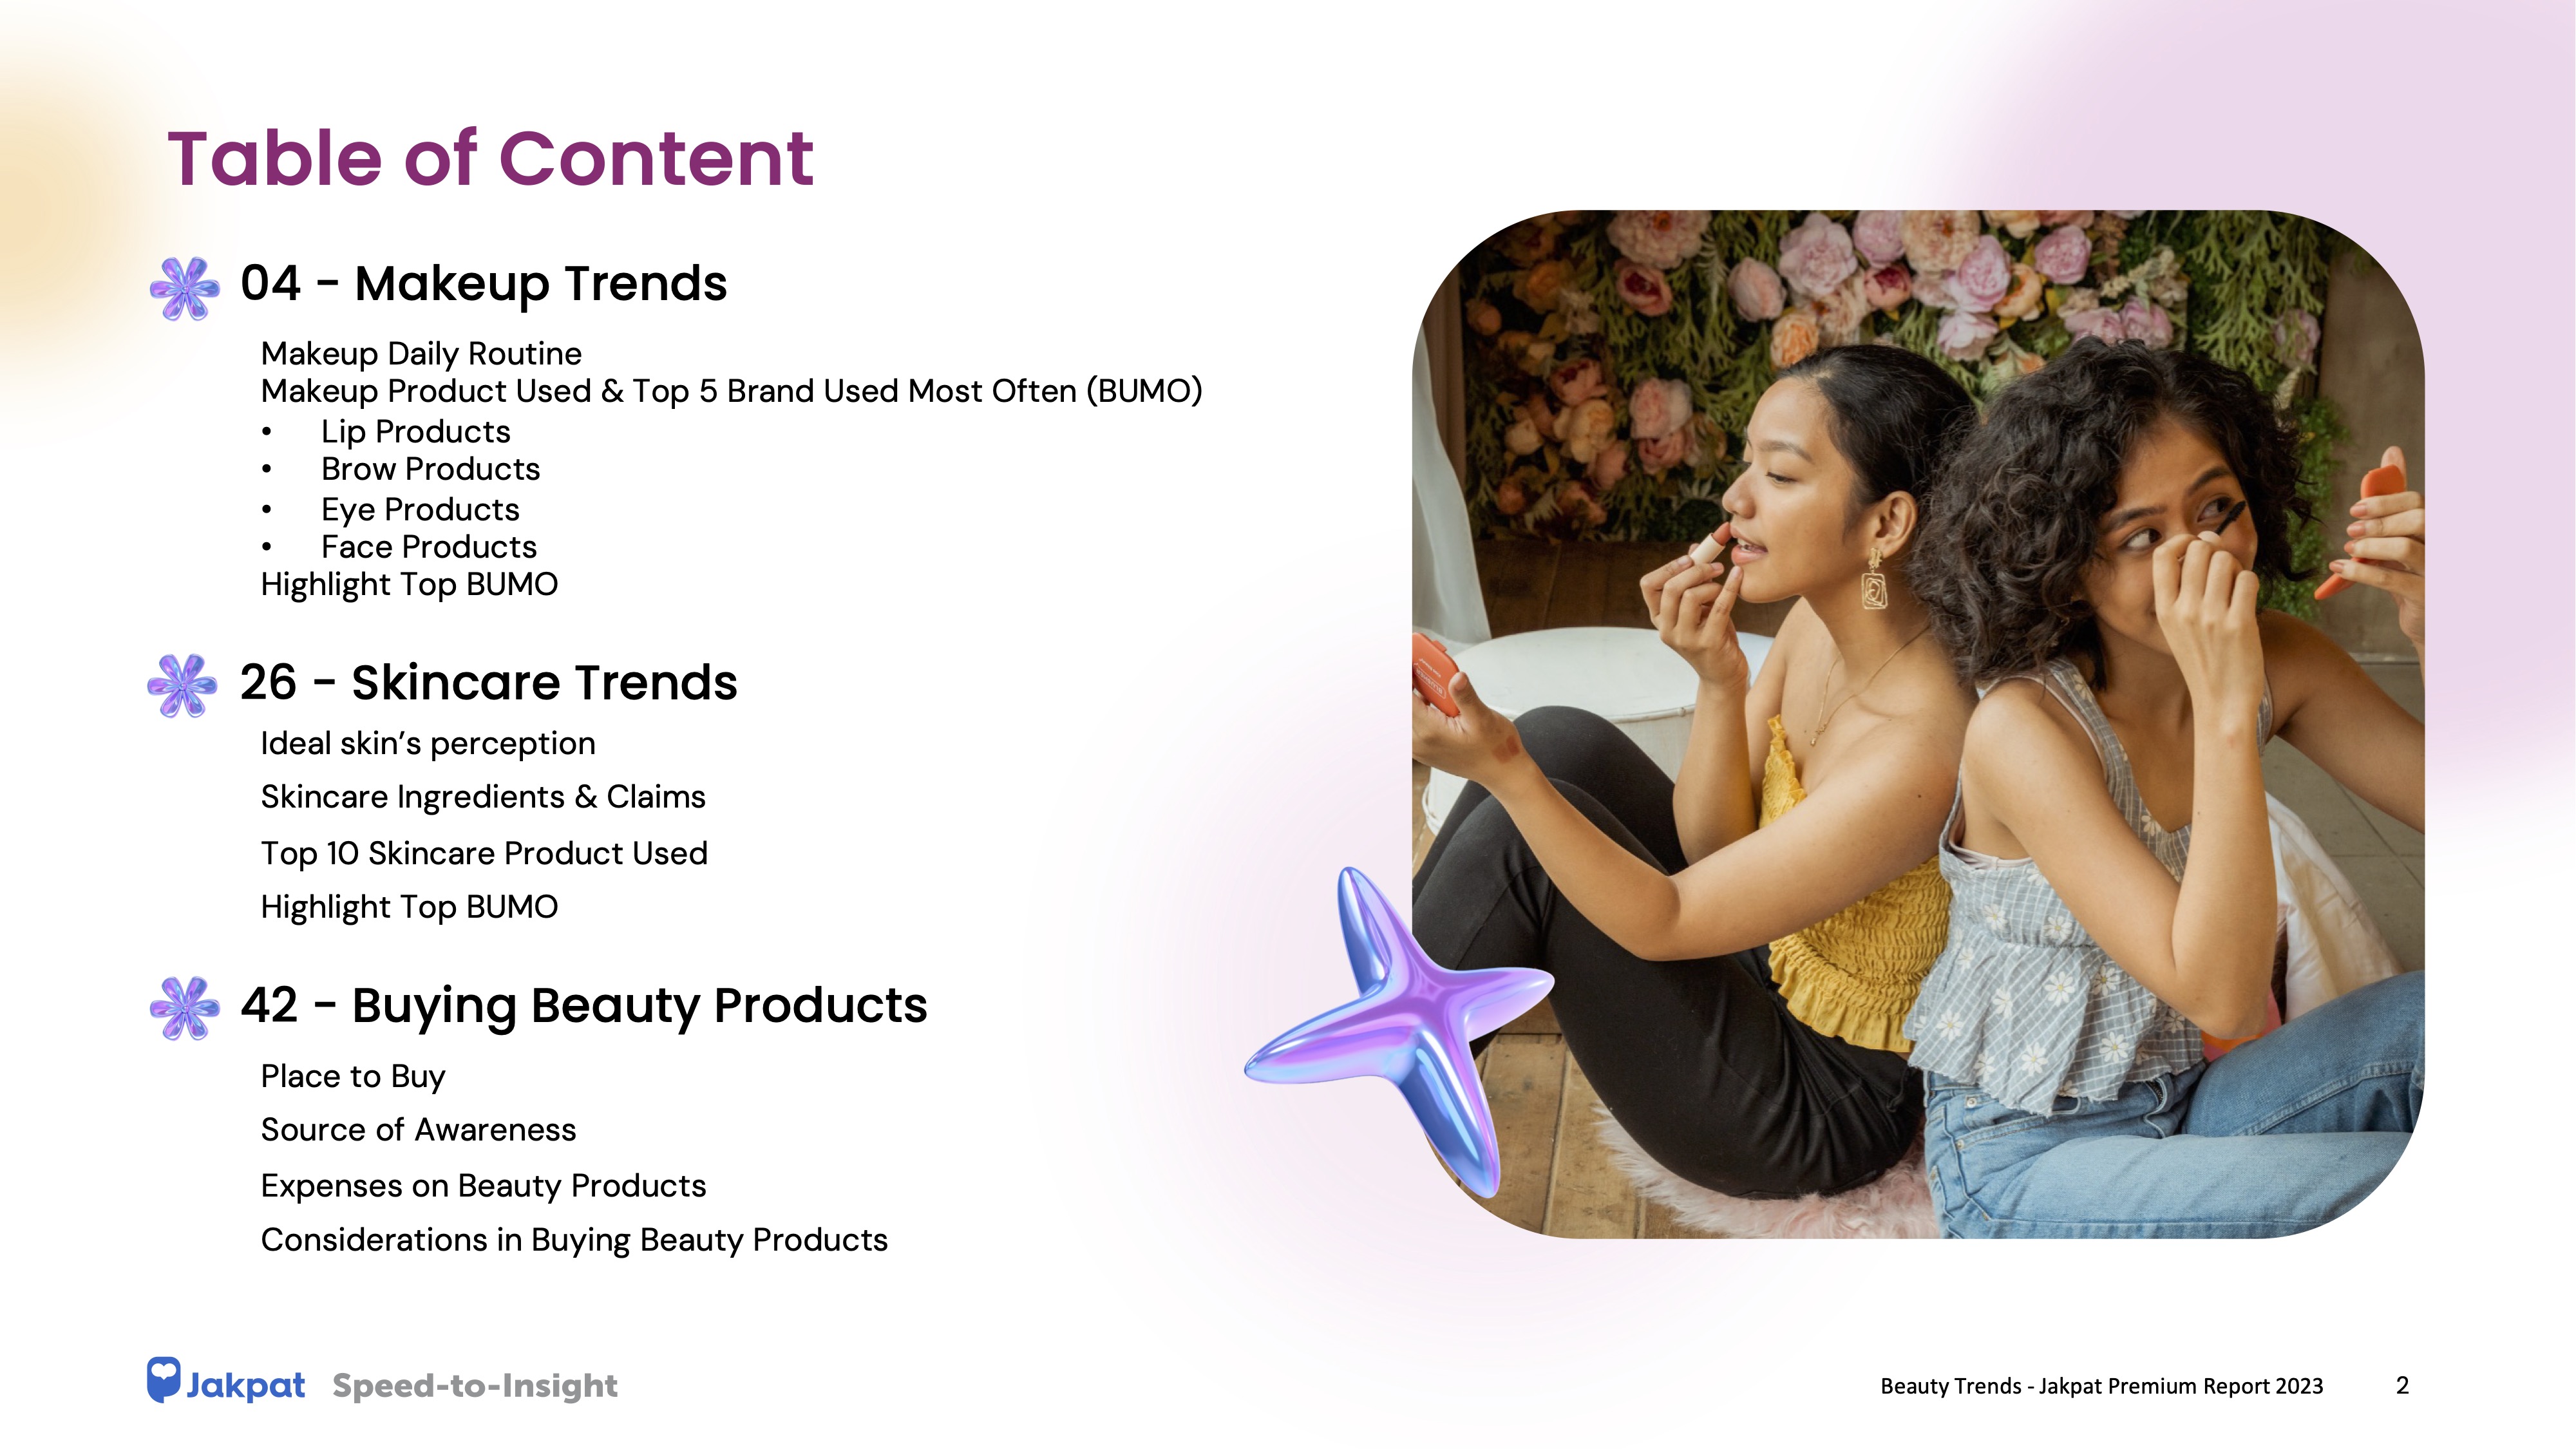 Preview Beauty Trends Makeup & Skincare 2023 - 1